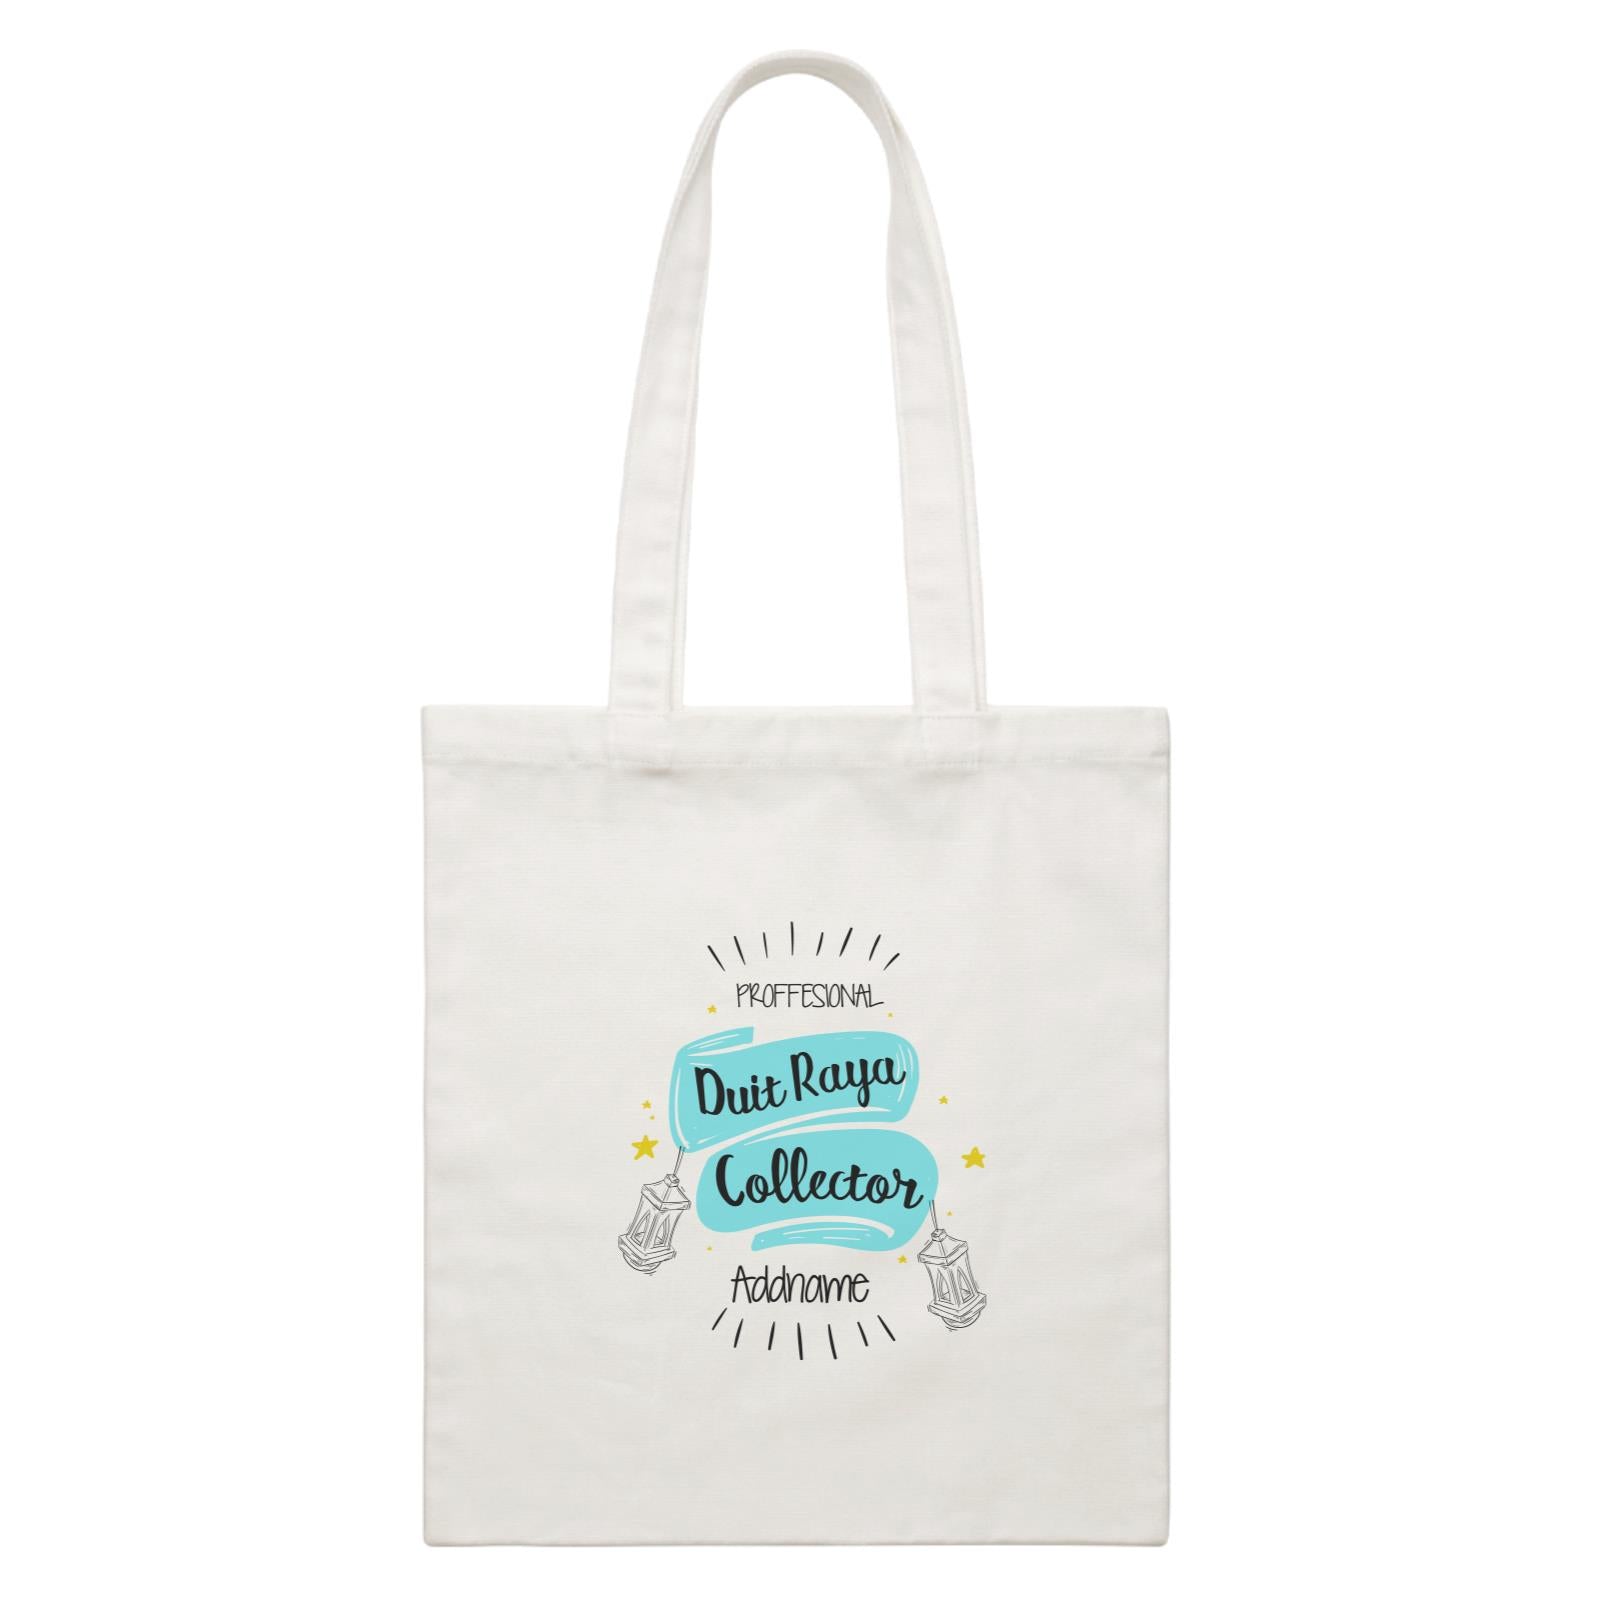 Raya Banner Proffesional Duit Raya Collector Addname White Canvas Bag